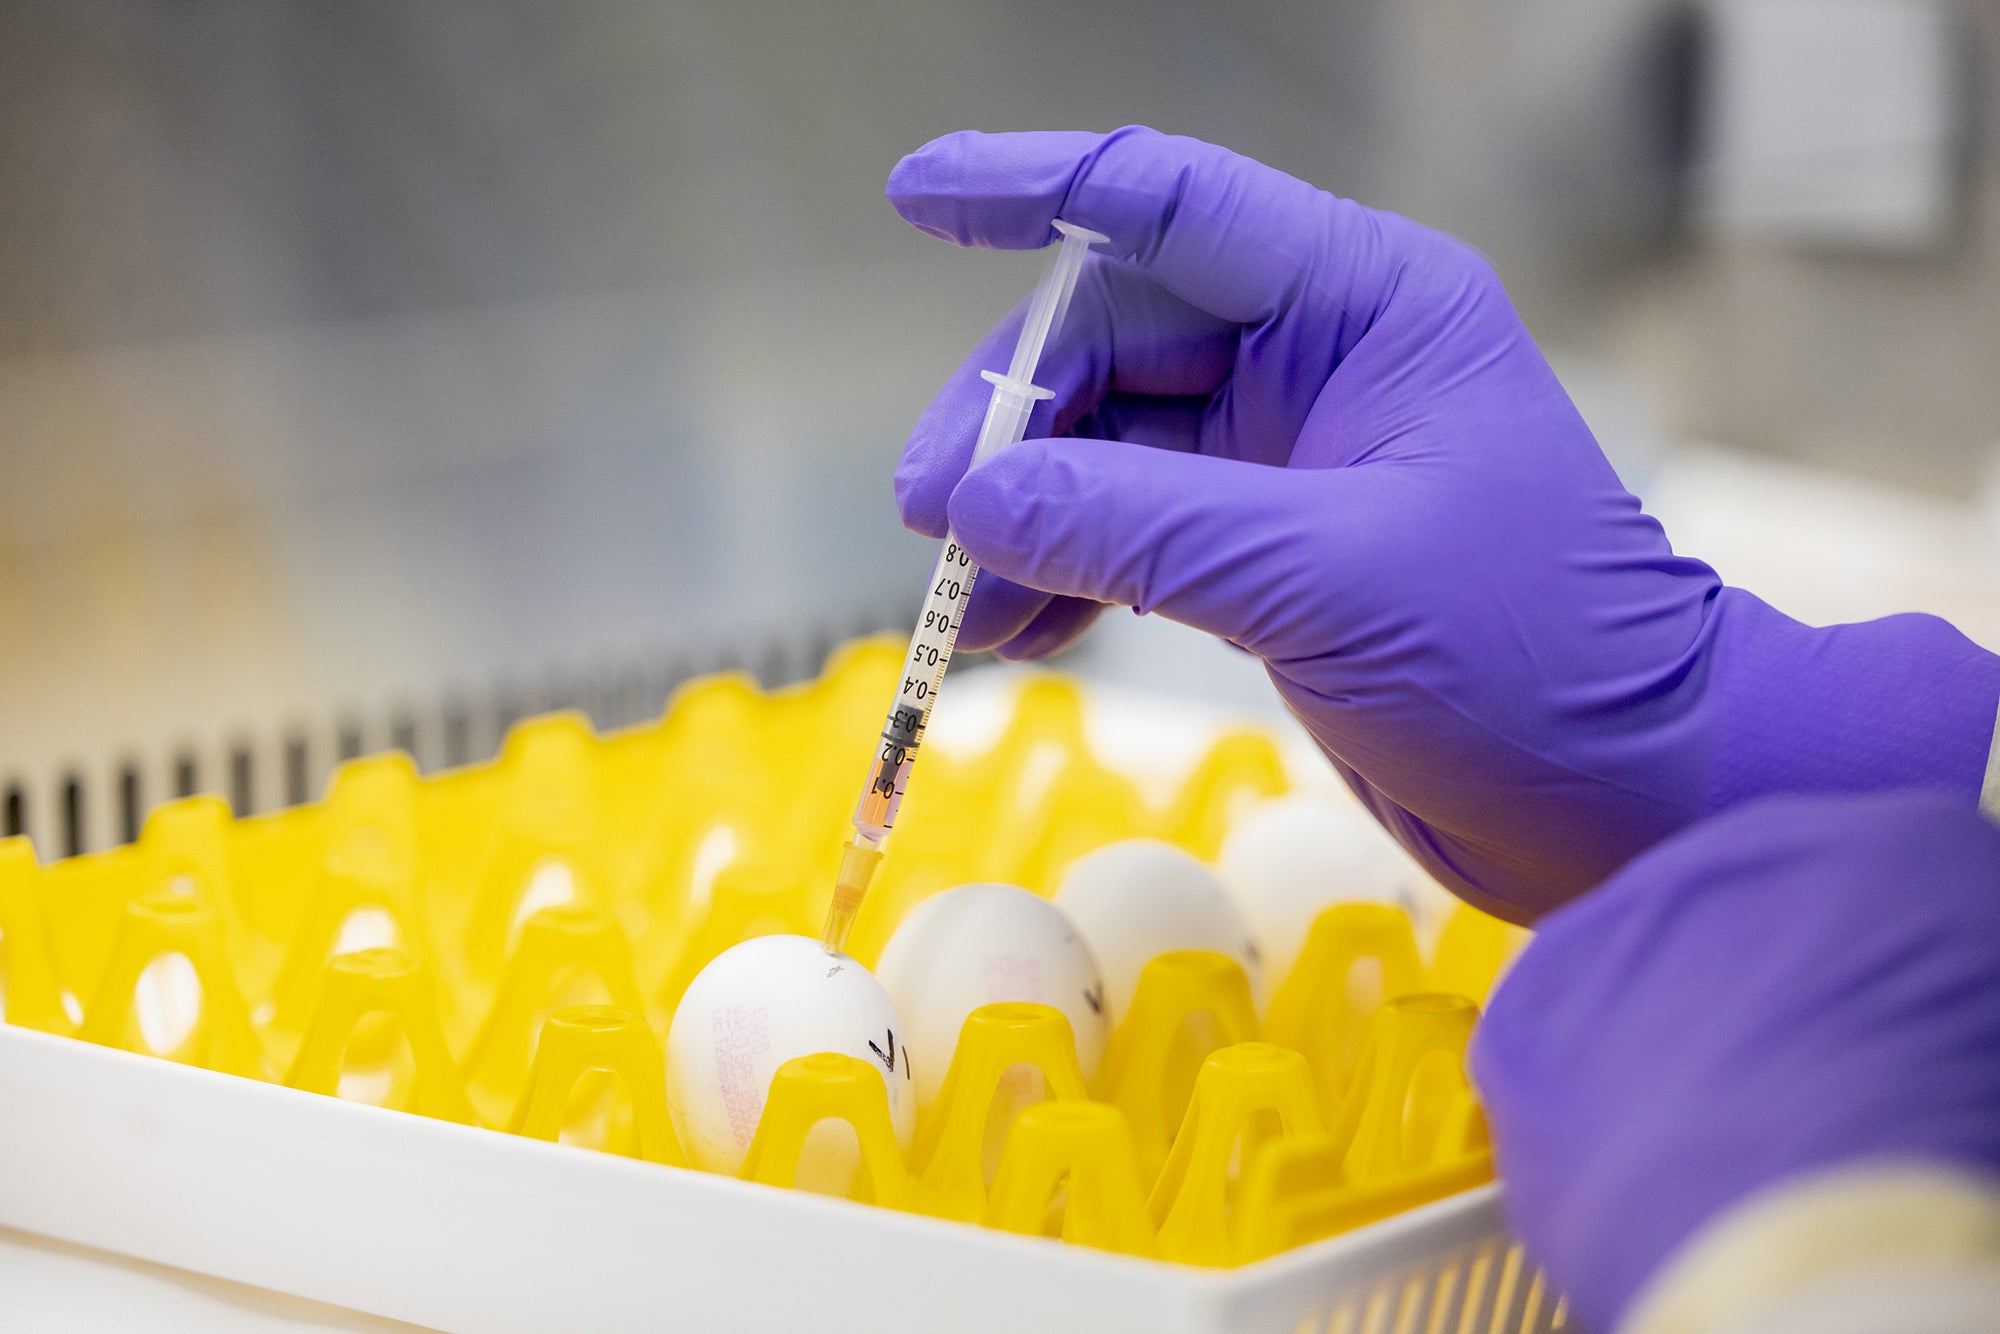 The gloved hand of a technician inserts a syringe into eggs being held in a yellow crate on a lab counter